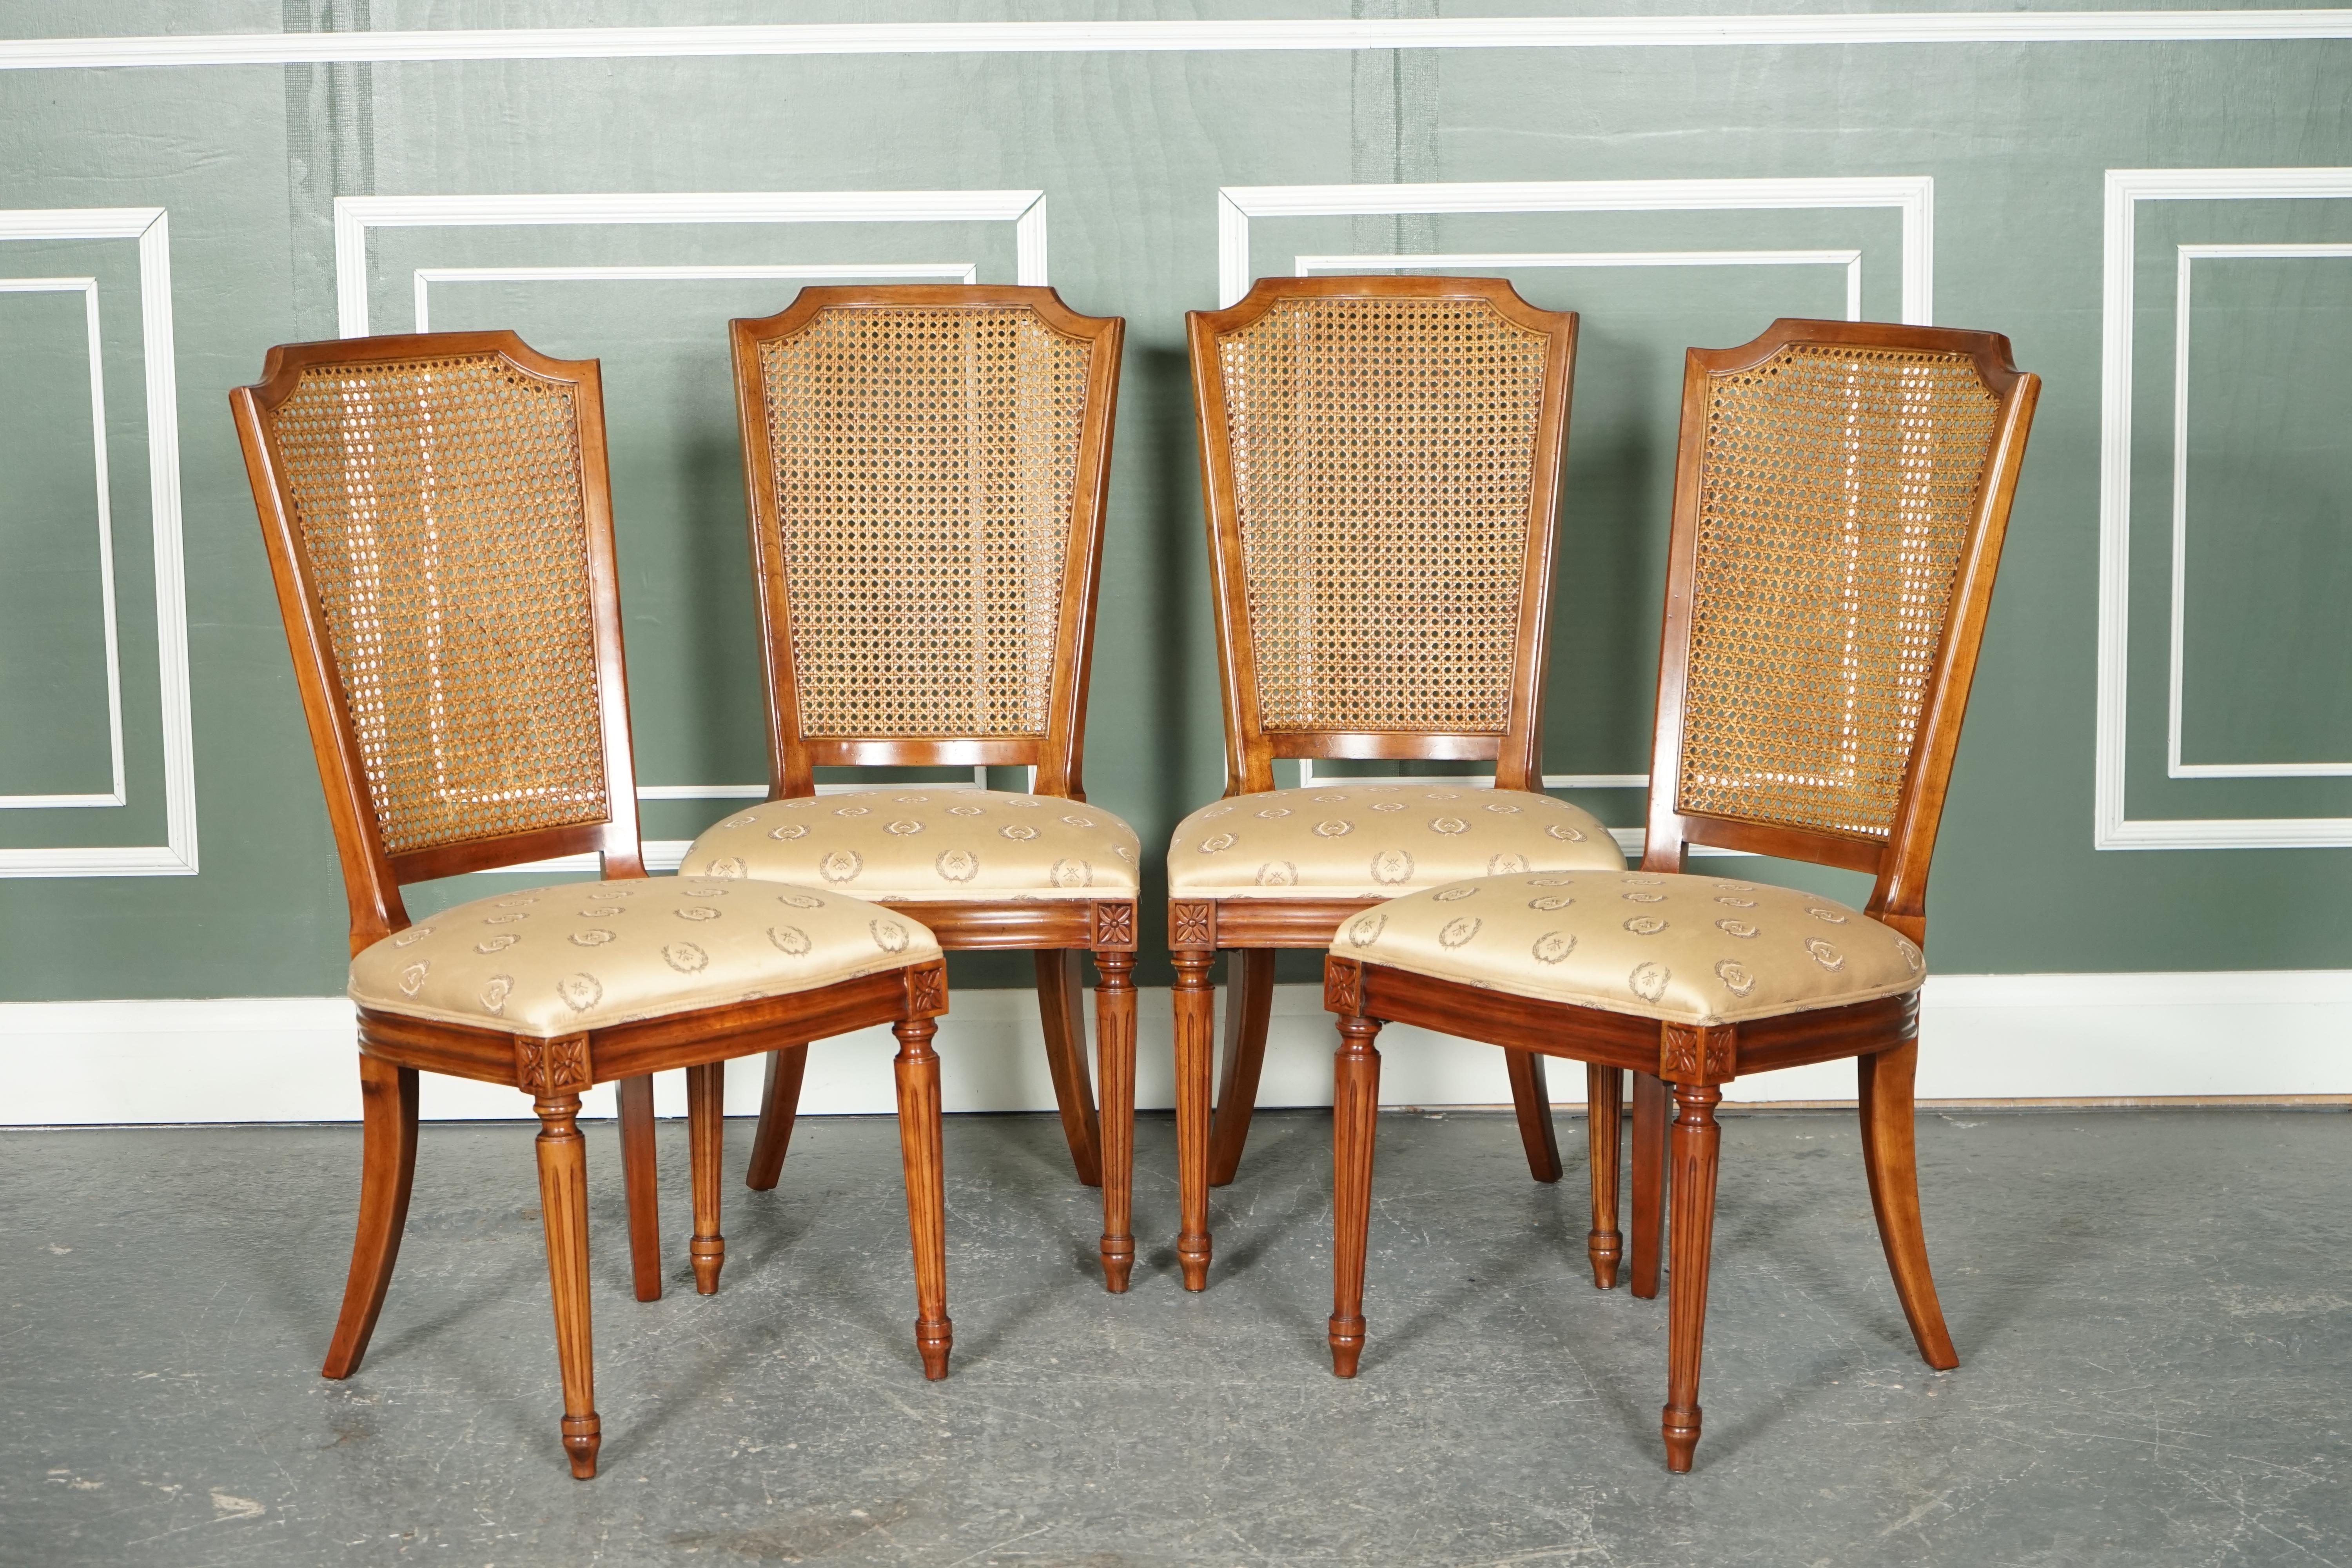 LOVELY SET OF 6 WALNUT BANDED WITH BERGERE BACKS DINING CHAIRS MADE BY KiNDEL 8